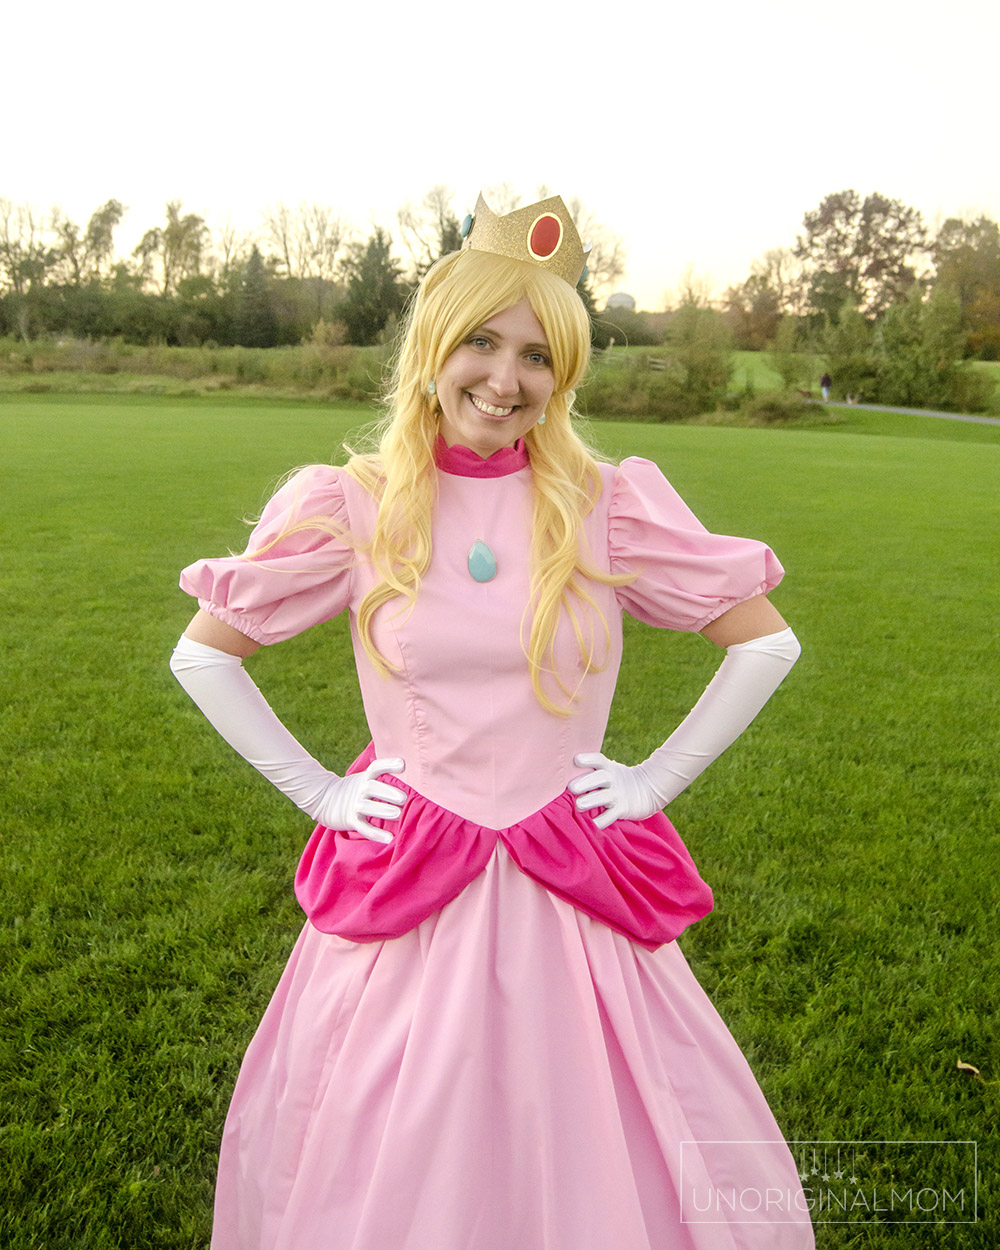 DIY Princess Peach costume for adults from a dress pattern